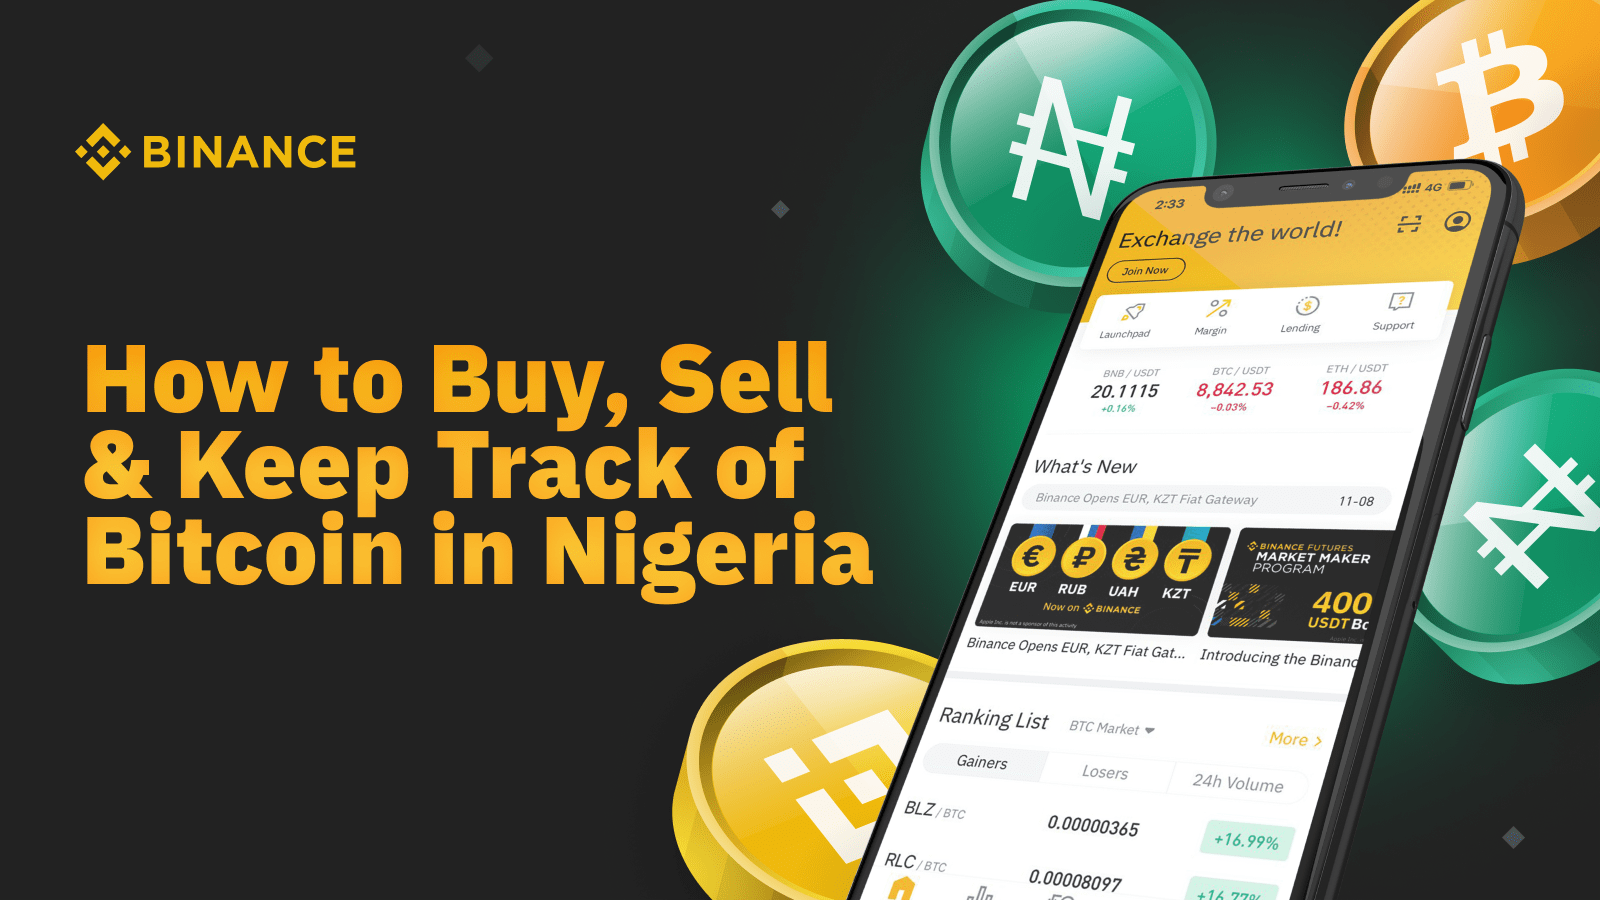 Most popular cryptocurrency apps Nigeria | Statista